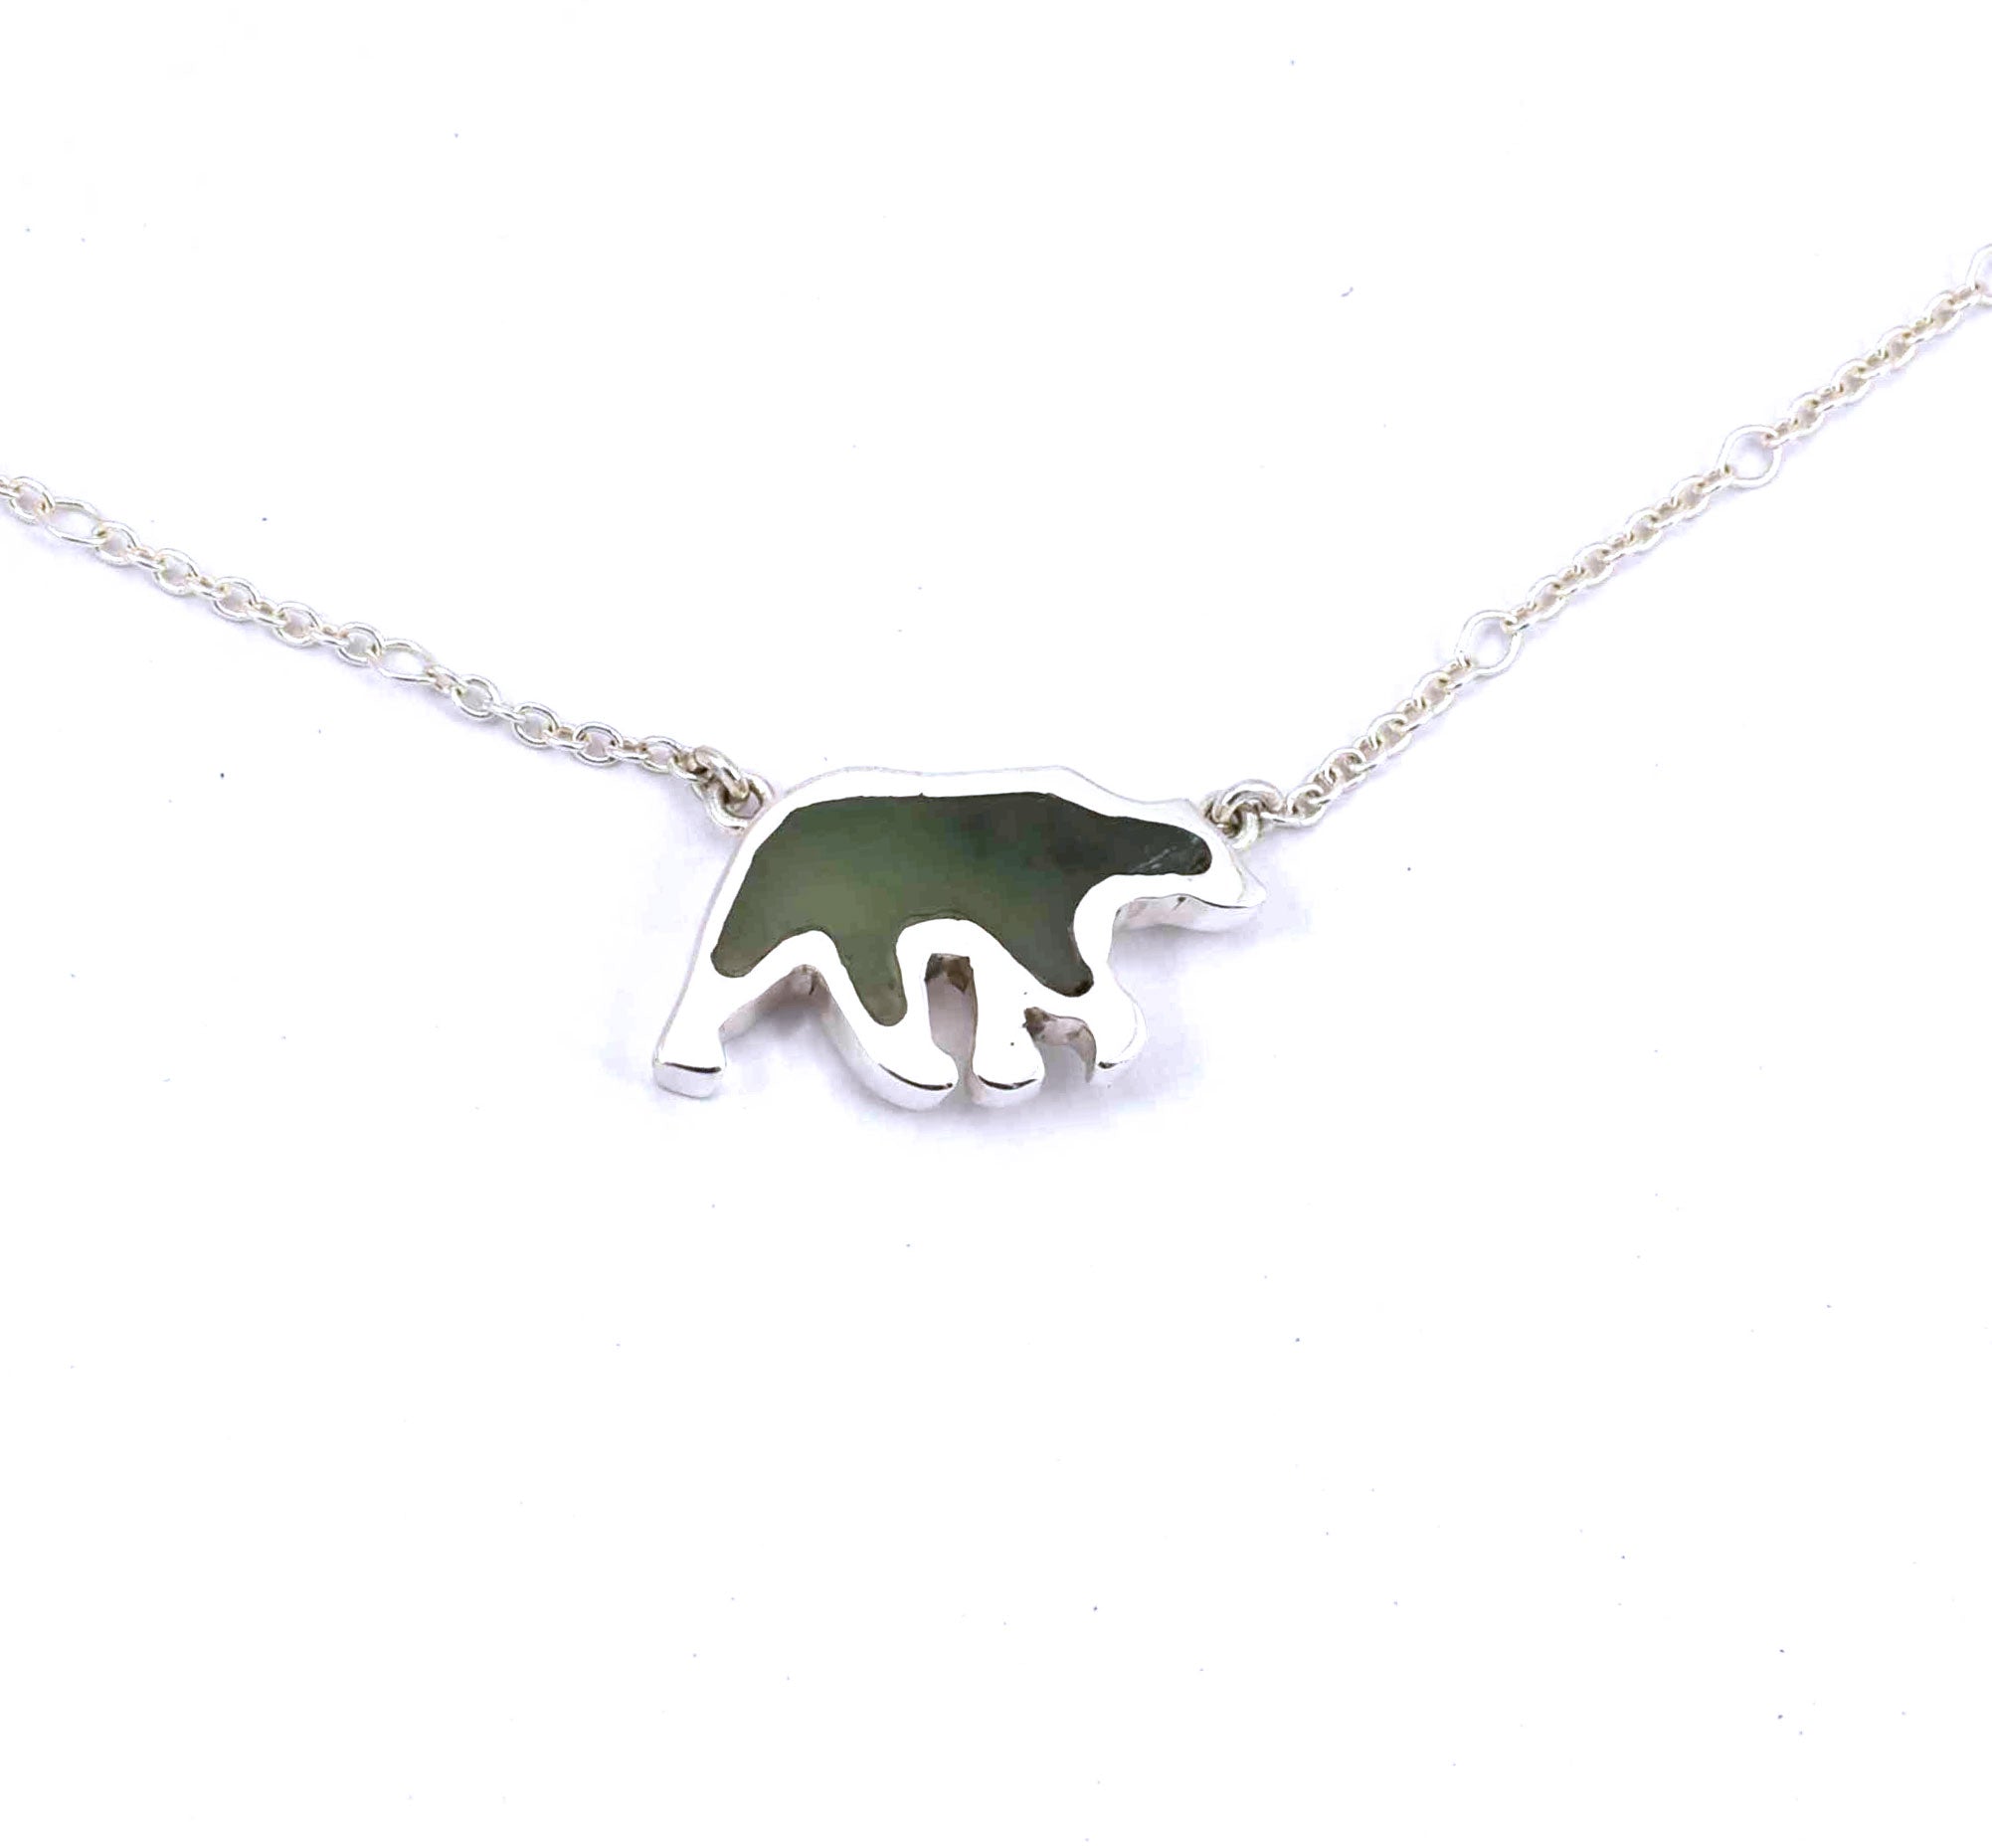 Front view of sterling silver bear pendant with jade gemstone inlay